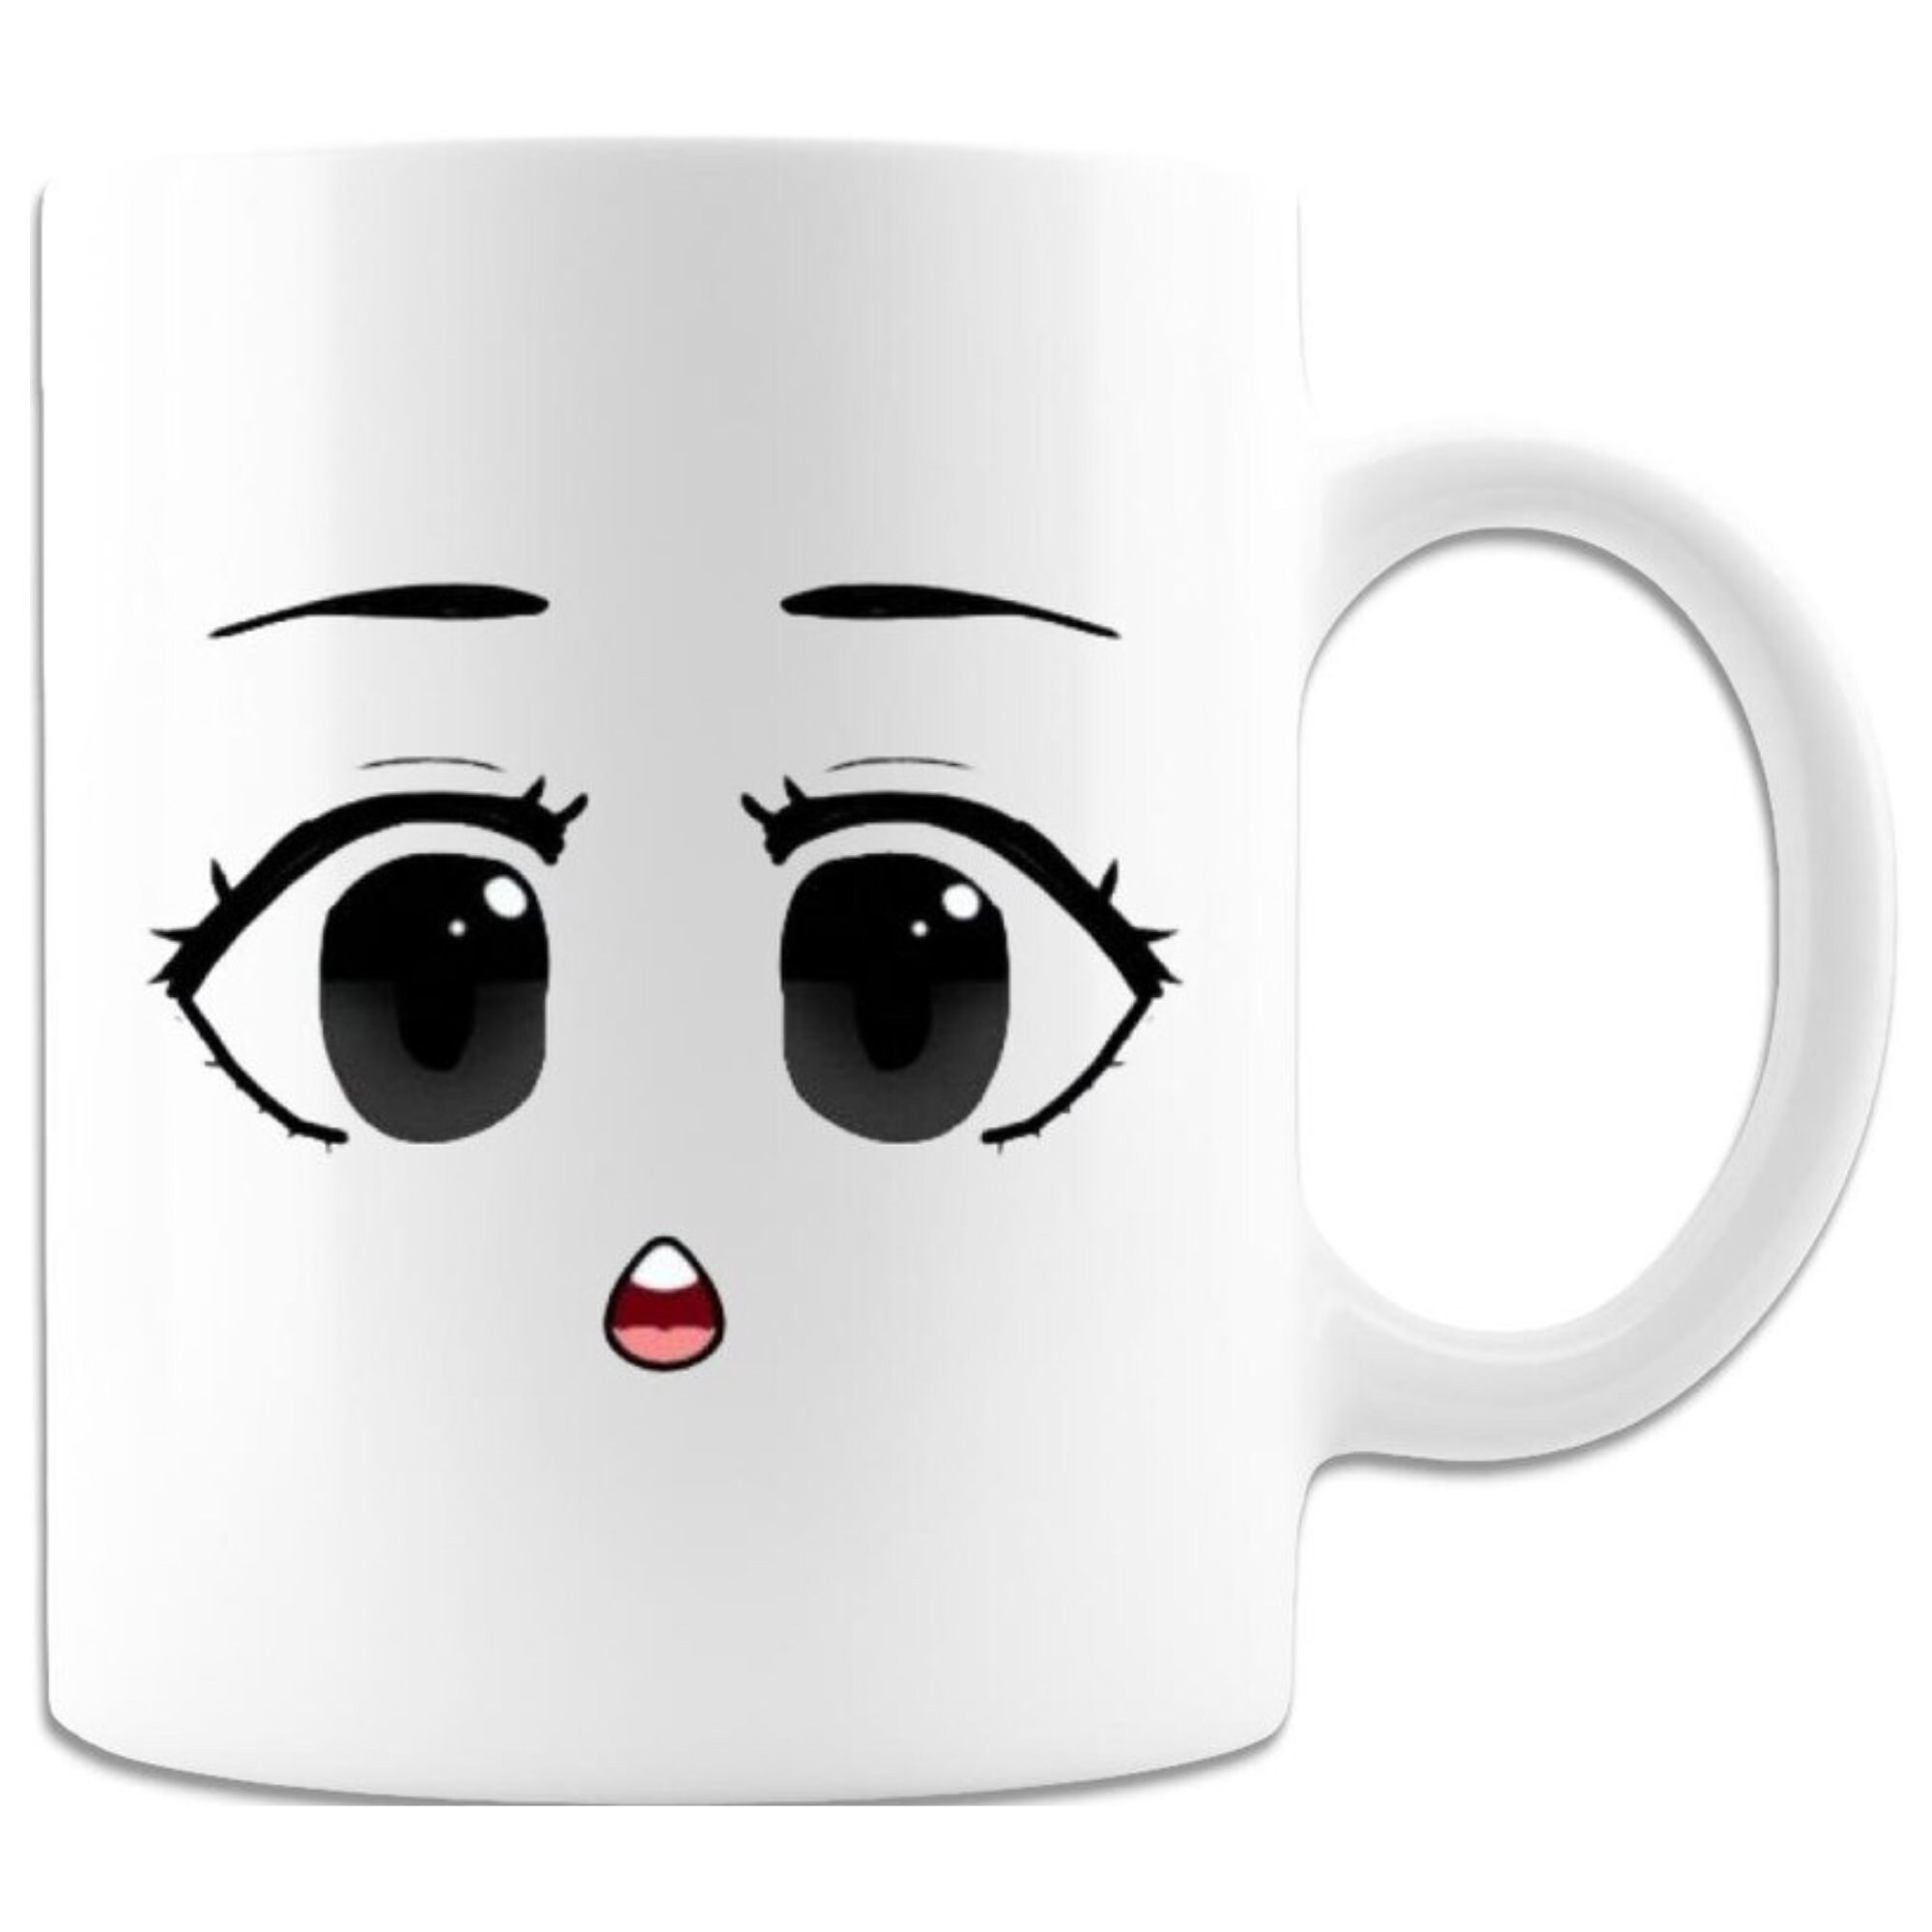 Roblox Woman Face Premium Quality Beautiful Roblox Gift for 